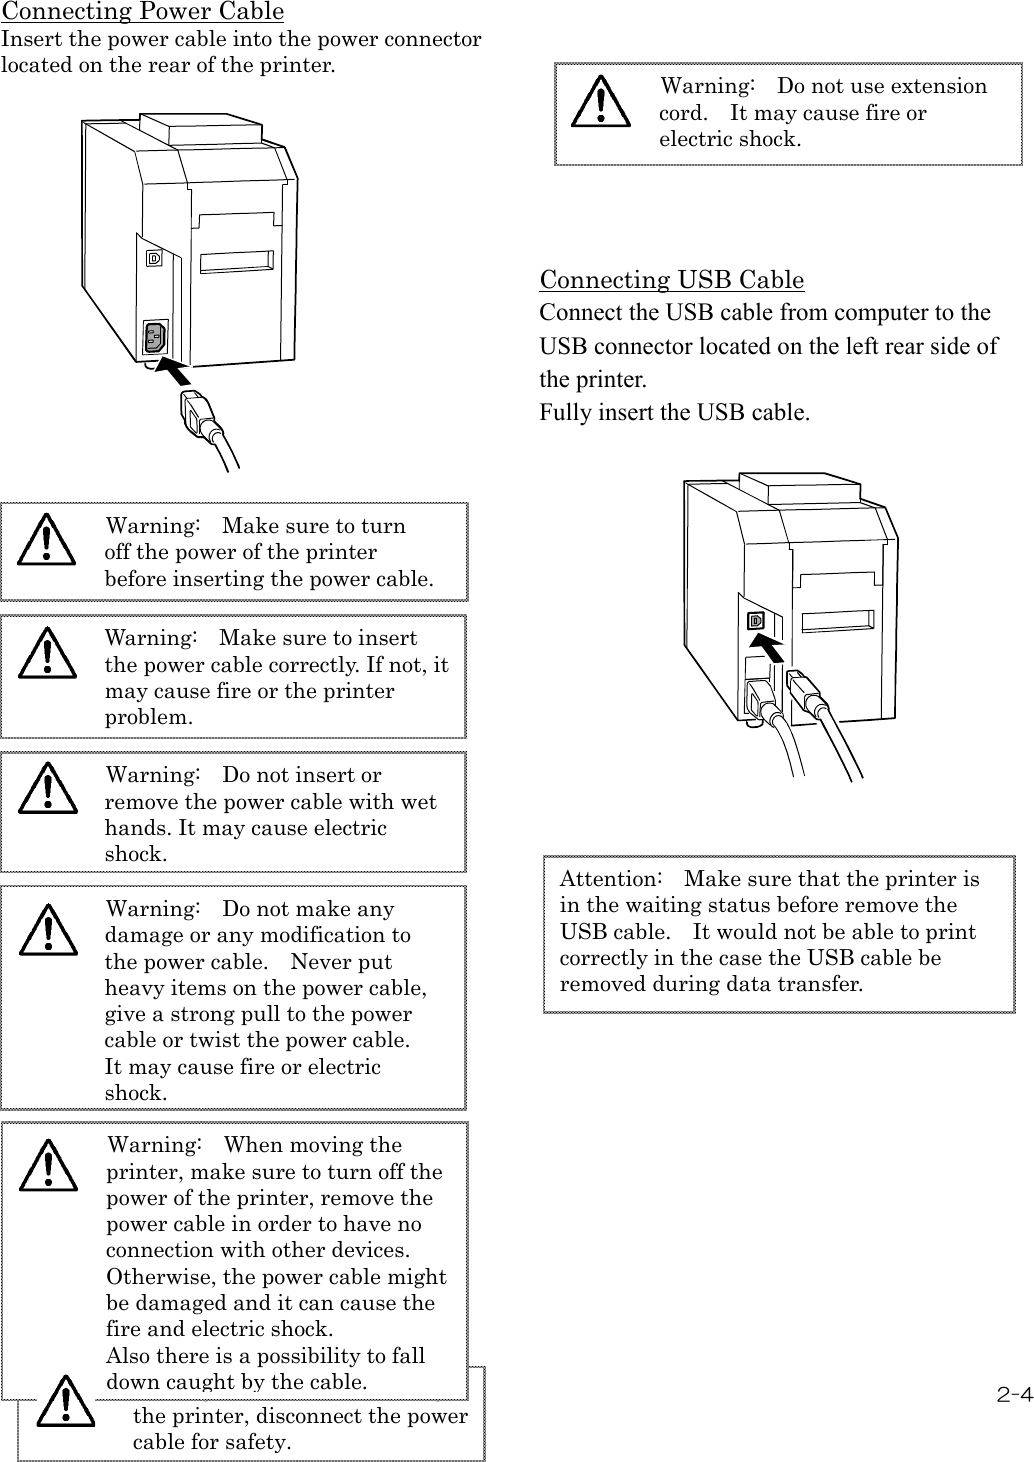  2-4  Connecting Power Cable Insert the power cable into the power connector located on the rear of the printer.                                                           Connecting USB Cable Connect the USB cable from computer to the USB connector located on the left rear side of the printer. Fully insert the USB cable.     Warning:   Make sure to turn off the power of the printer before inserting the power cable.  Warning:   Make sure to insert the power cable correctly. If not, it may cause fire or the printer problem. Warning:   Do not insert or remove the power cable with wet hands. It may cause electric shock. Warning:   Do not make any damage or any modification to the power cable.    Never put heavy items on the power cable, give a strong pull to the power cable or twist the power cable.   It may cause fire or electric shock. Warning:   When it is not using the printer, disconnect the power cable for safety. Warning:   Do not use extension cord.    It may cause fire or electric shock. Warning:   When moving the printer, make sure to turn off the power of the printer, remove the power cable in order to have no connection with other devices. Otherwise, the power cable might be damaged and it can cause the fire and electric shock. Also there is a possibility to fall down caught by the cable. Attention:   Make sure that the printer is  in the waiting status before remove the USB cable.    It would not be able to print correctly in the case the USB cable be removed during data transfer.       